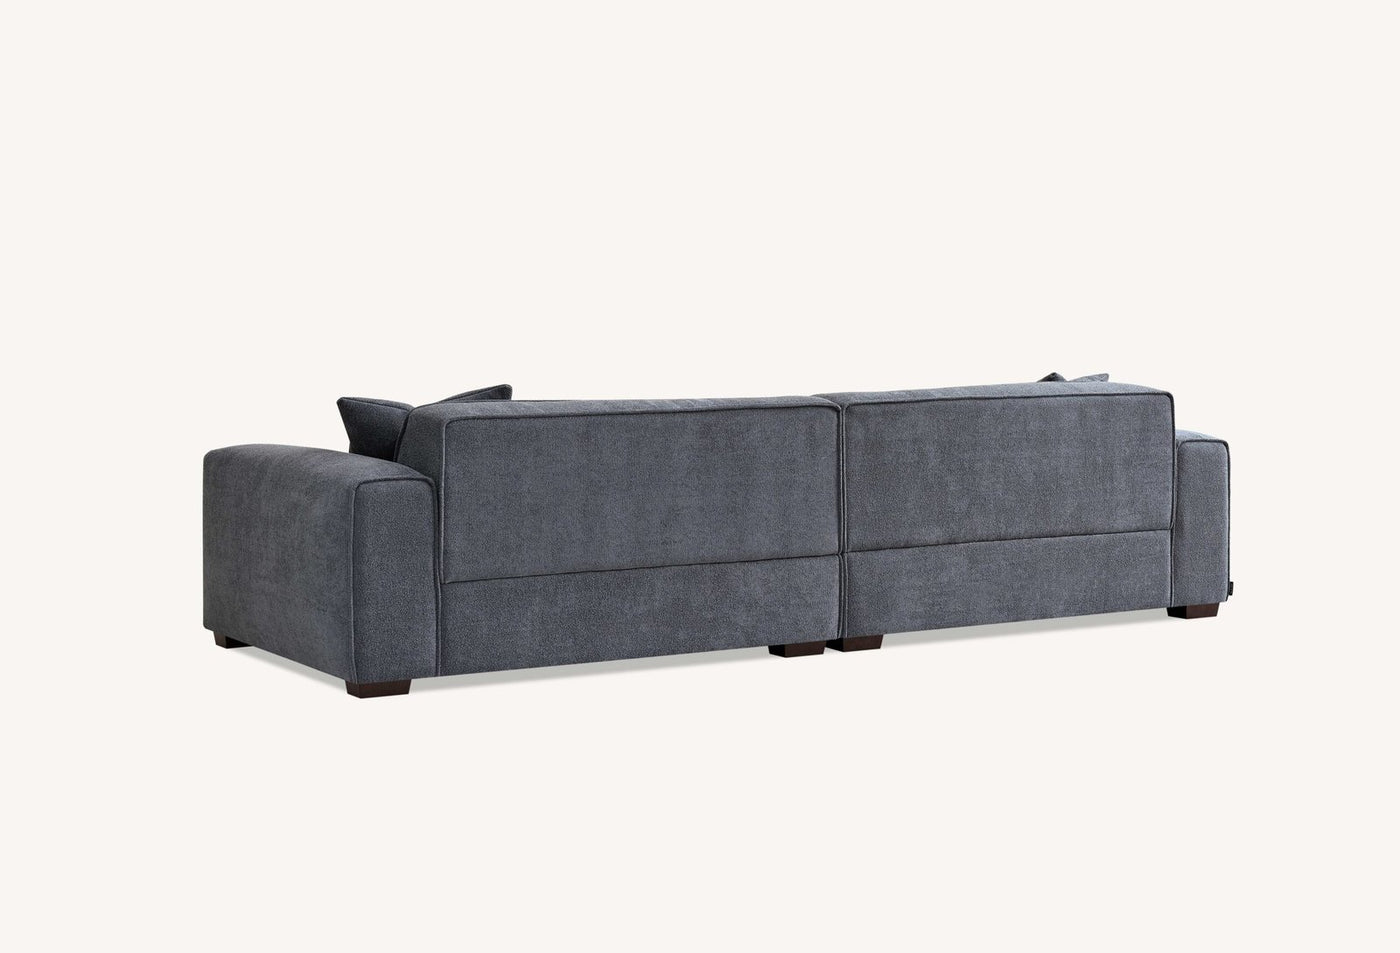 Aluxo Dakota 4 seater with Chaise in Charcoal Boucle - Grab Some Furniture